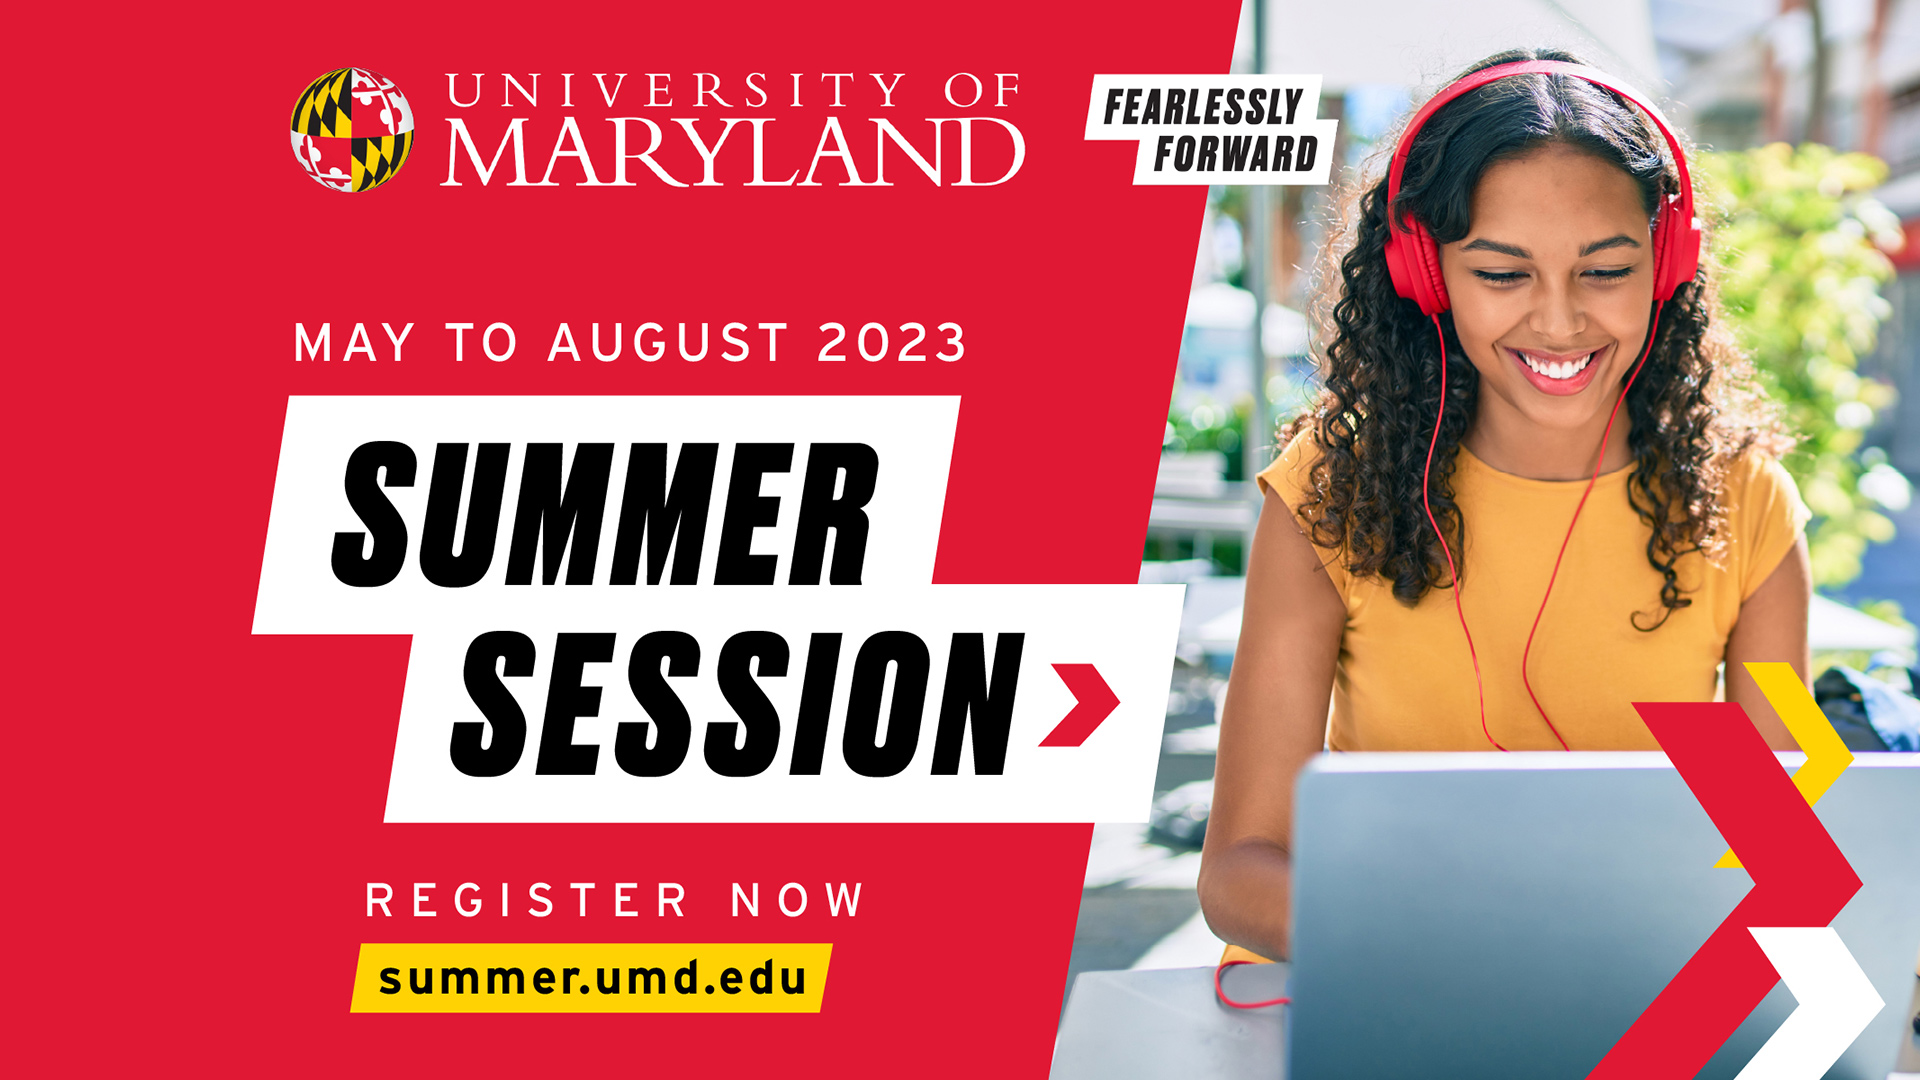 University of Maryland > Fearlessly Forward | May to August 2023: Summer Session > | Register Now | summer.umd.edu